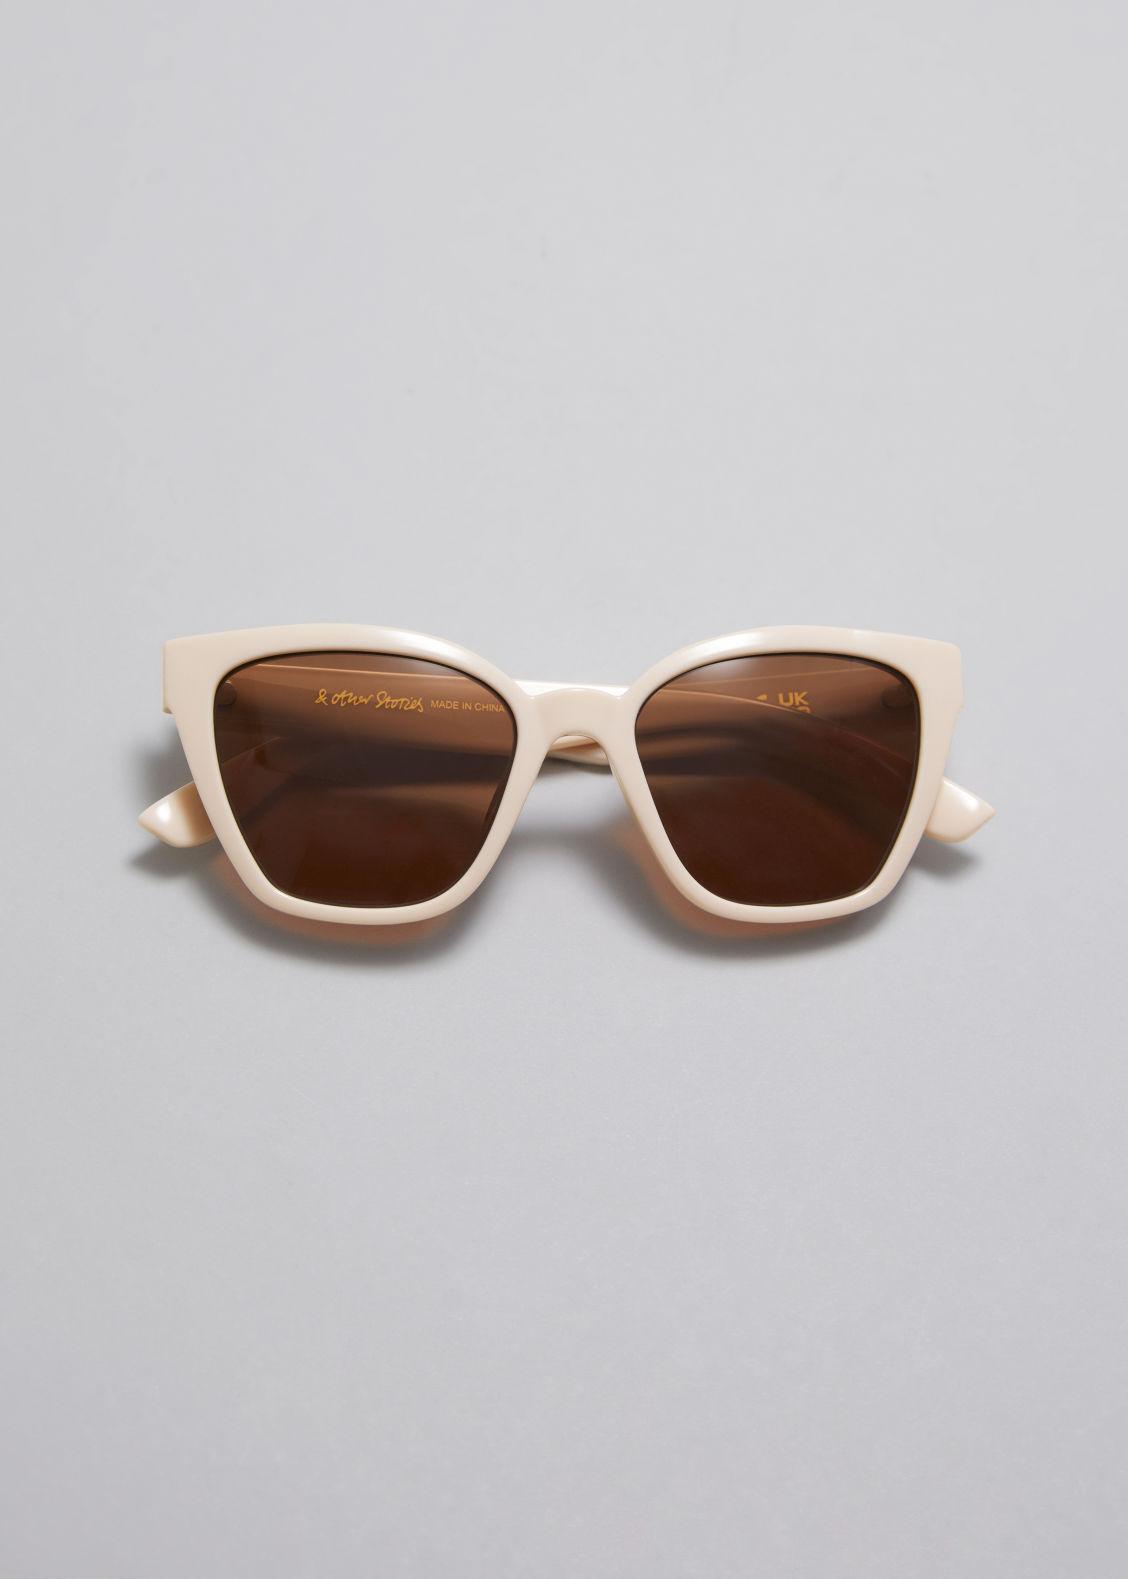 bh indebære sej Women's & Other Stories Sunglasses from $29 | Lyst